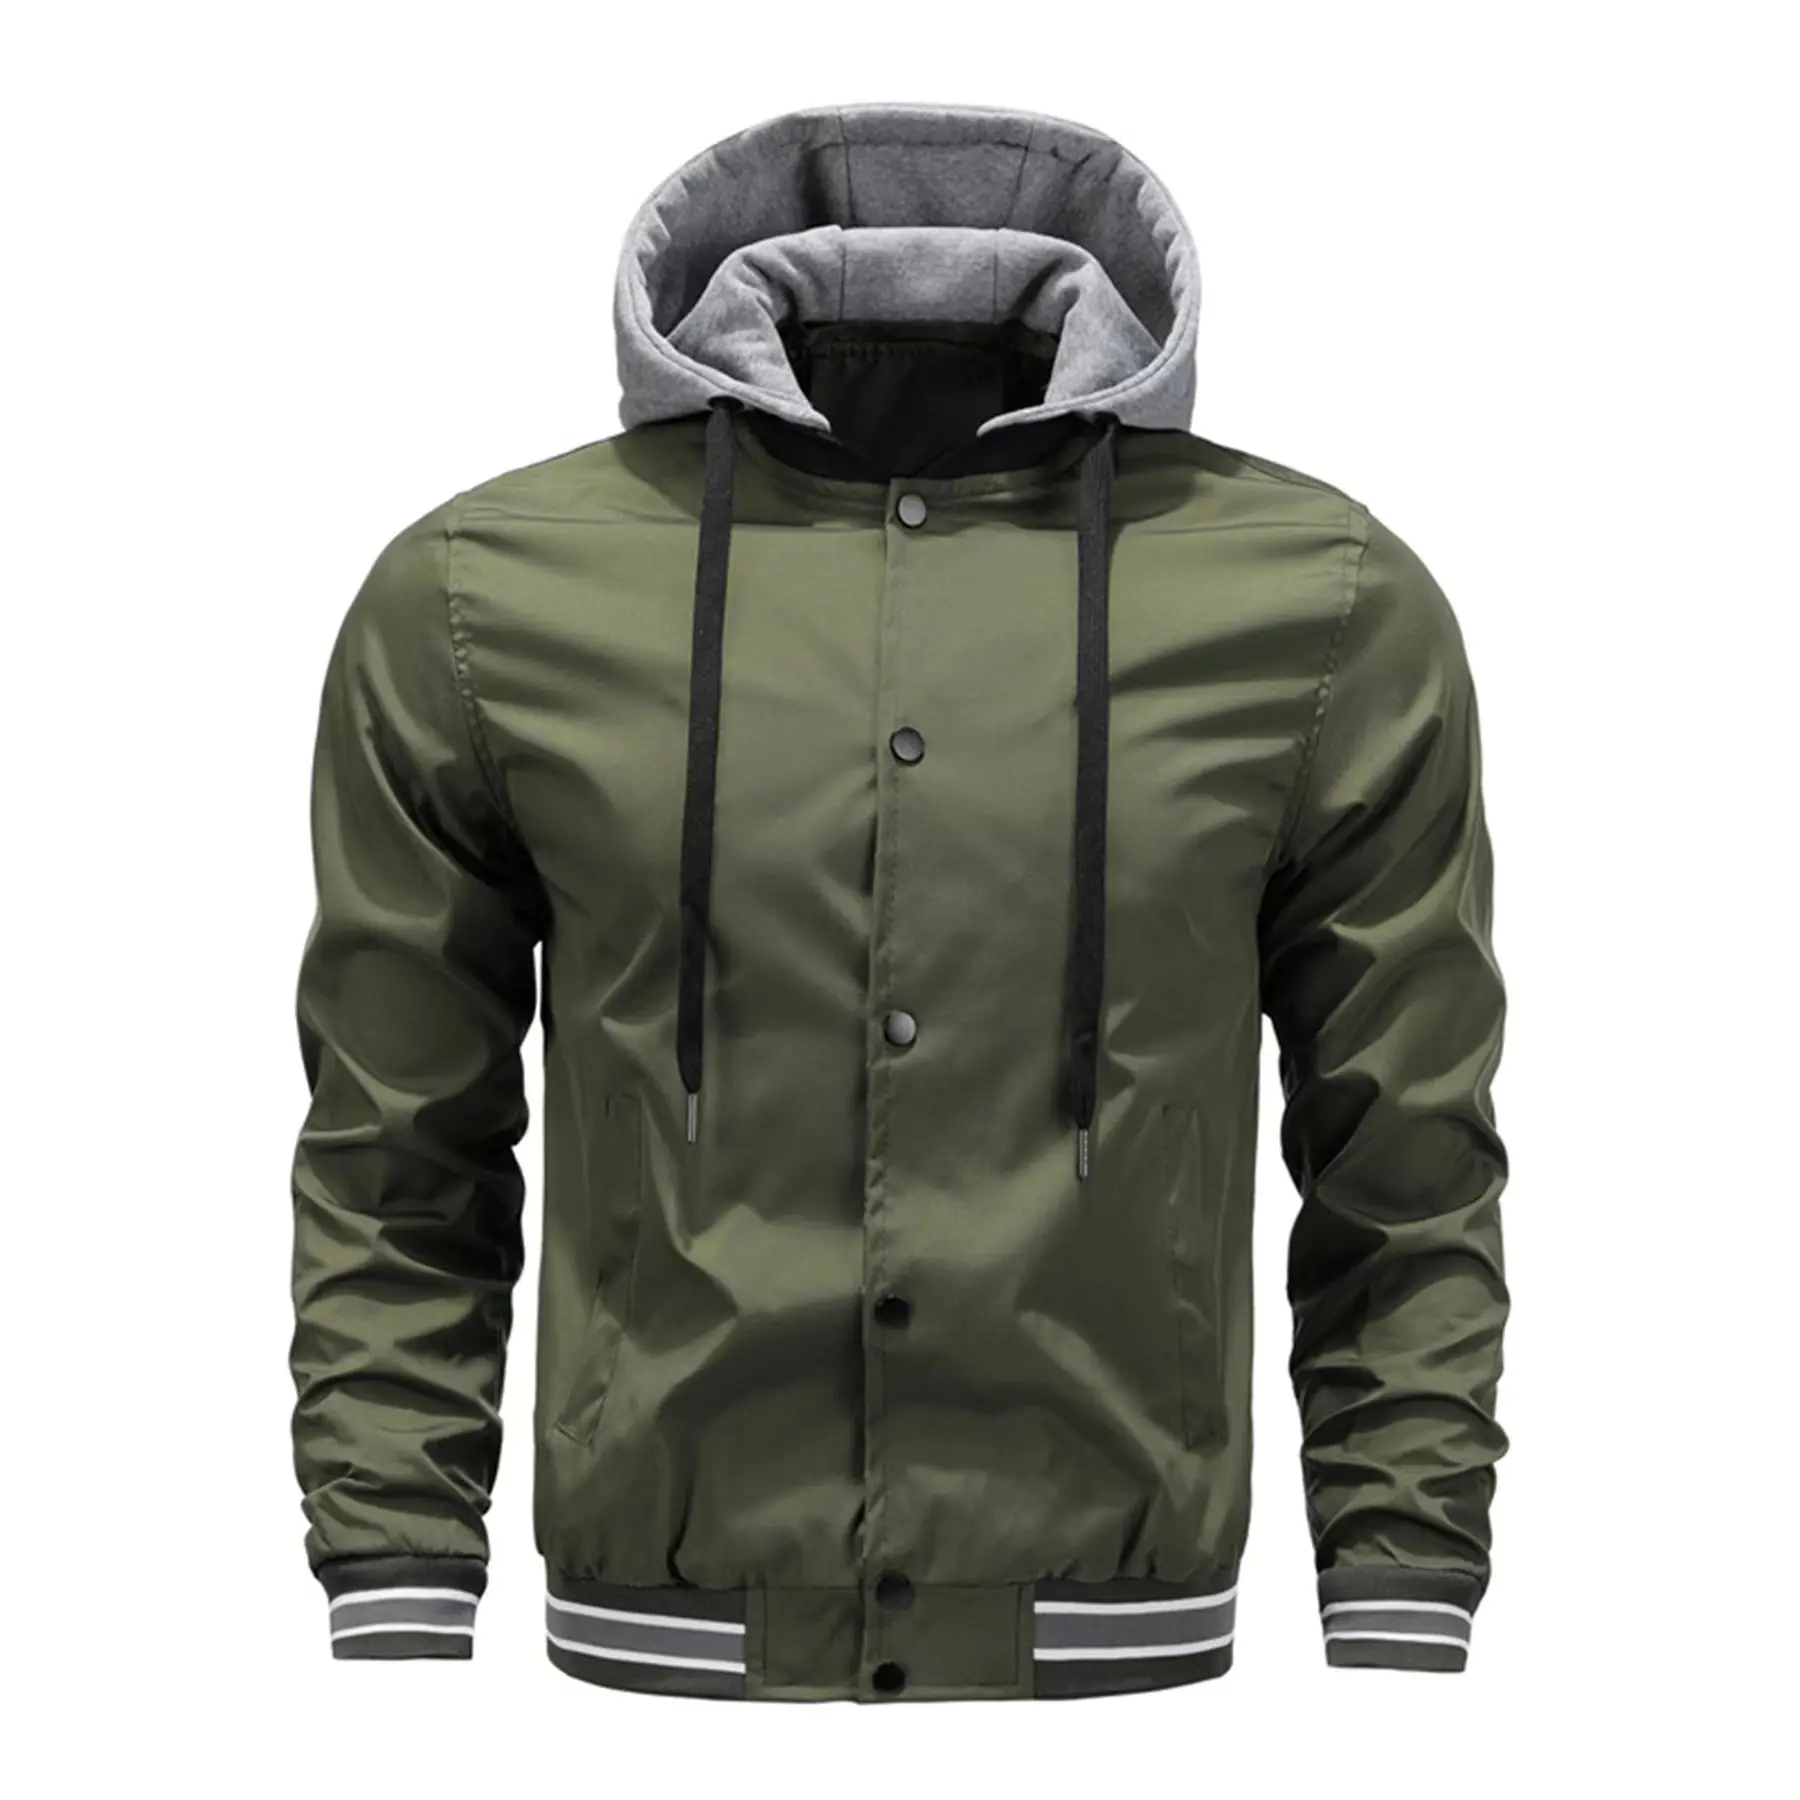 2022 New Men's Casual Hoodie Jacket Fashion Self-cultivation Winter Bomber Jacket Men